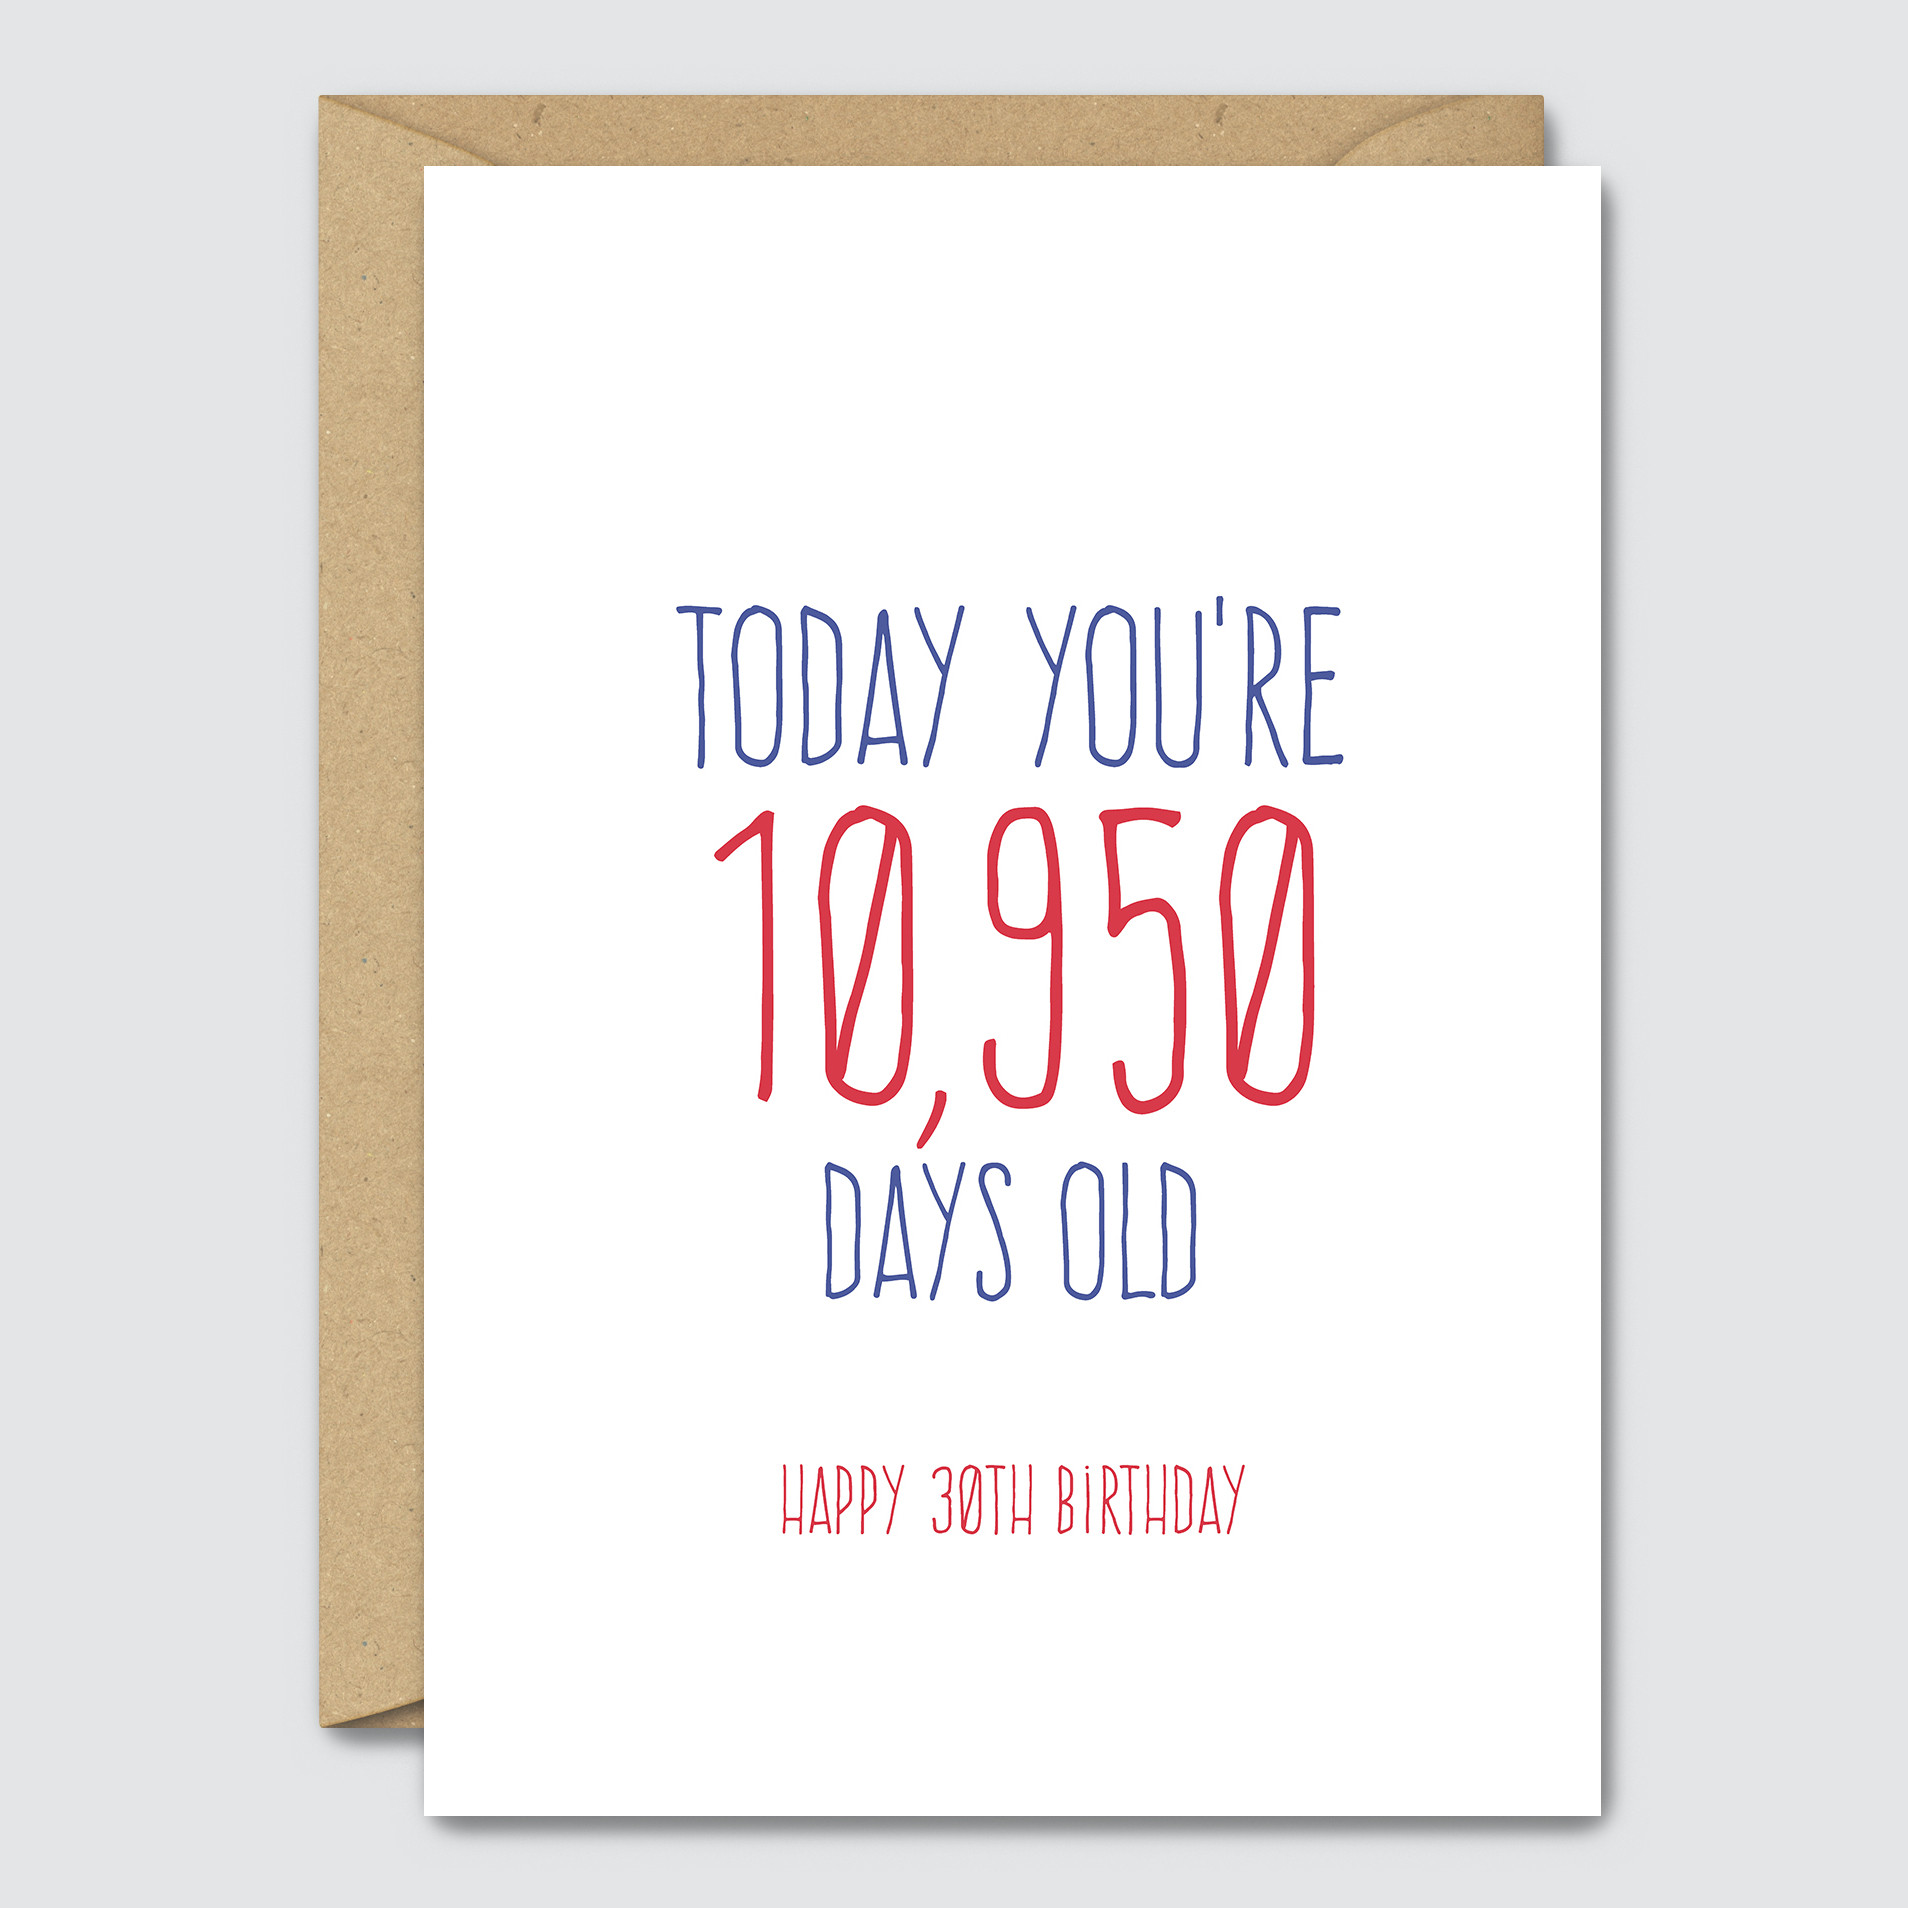 30th Birthday Cards
 Today You re 10 950 Days Old Happy 30th Birthday Funny